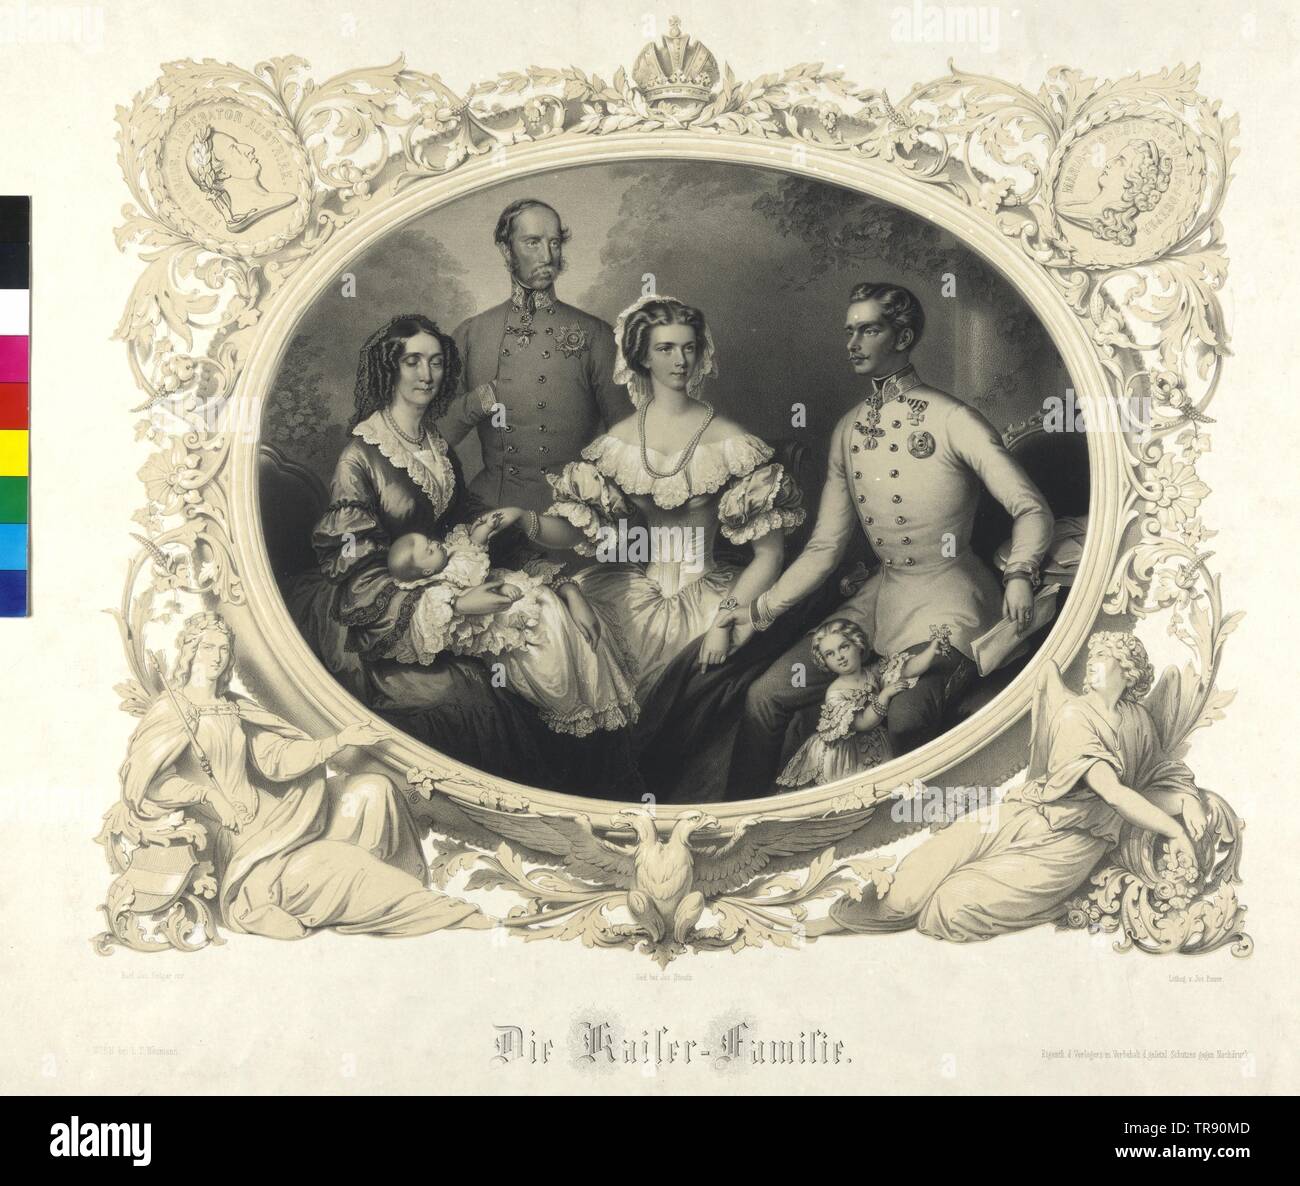 The imperial family, group picture: Franz Joseph I, Emperor of Austria together with his wife Elisabeth, the daughters Sophie and Gisela, and his parents Franz Karl, Archduke of Austria and Sophie, born princess of Bavaria. tinted lithograph by Joseph Anton Bauer based on a draft by Karl Joseph Geiger, Additional-Rights-Clearance-Info-Not-Available Stock Photo